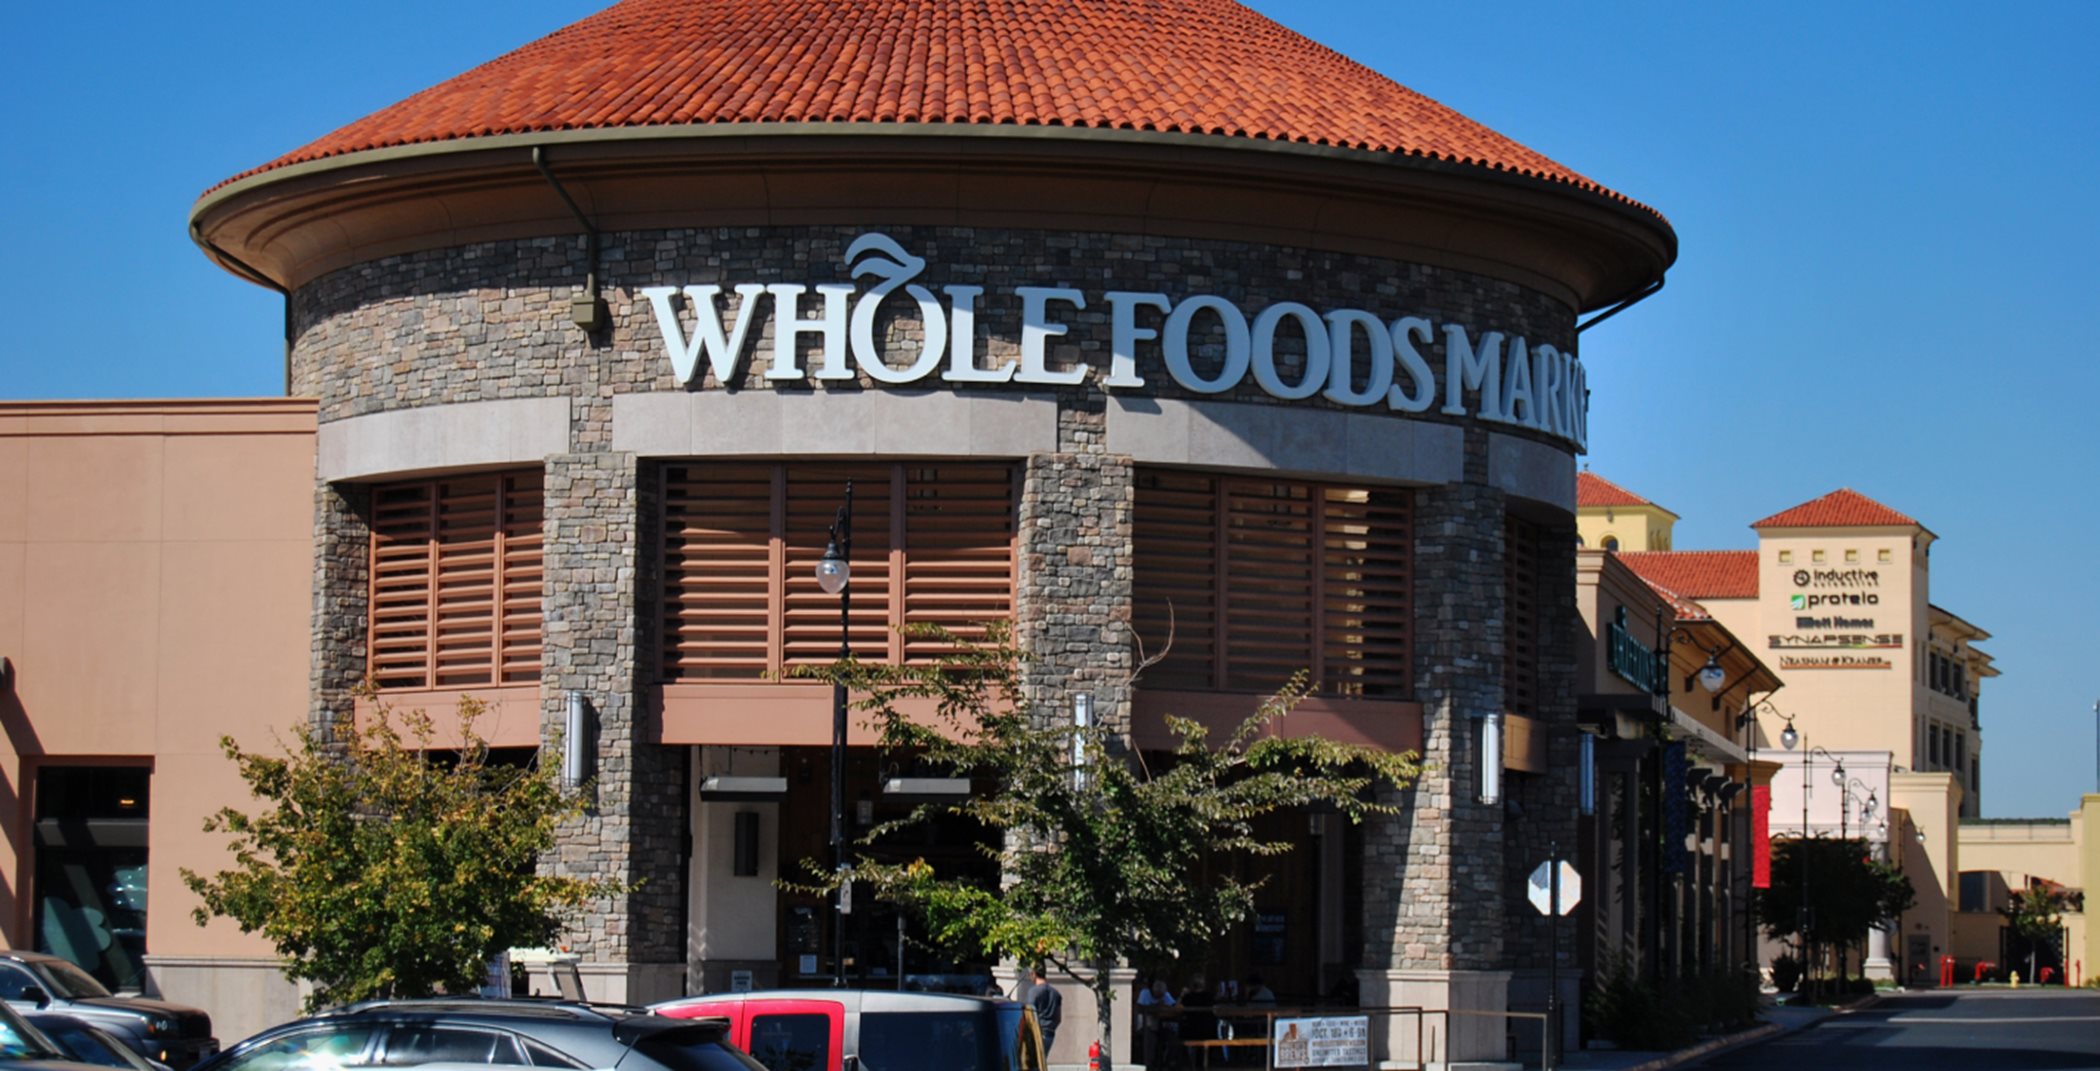 Whole Foods at Palladio open-air mall